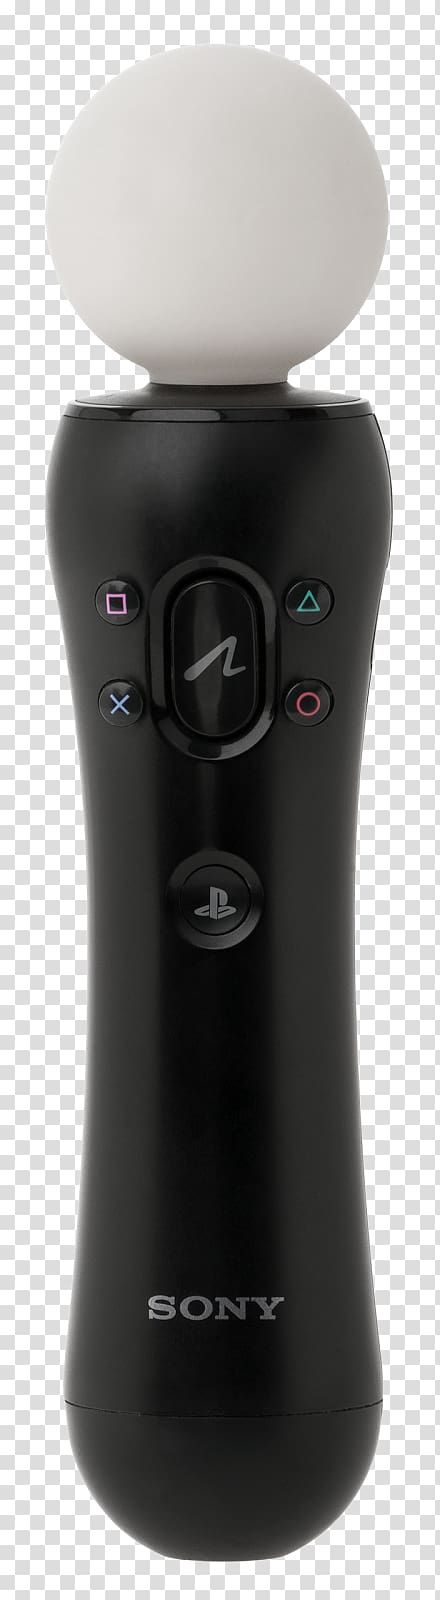 PlayStation Move PlayStation Eye PlayStation VR PlayStation 3, controller. transparent background PNG clipart